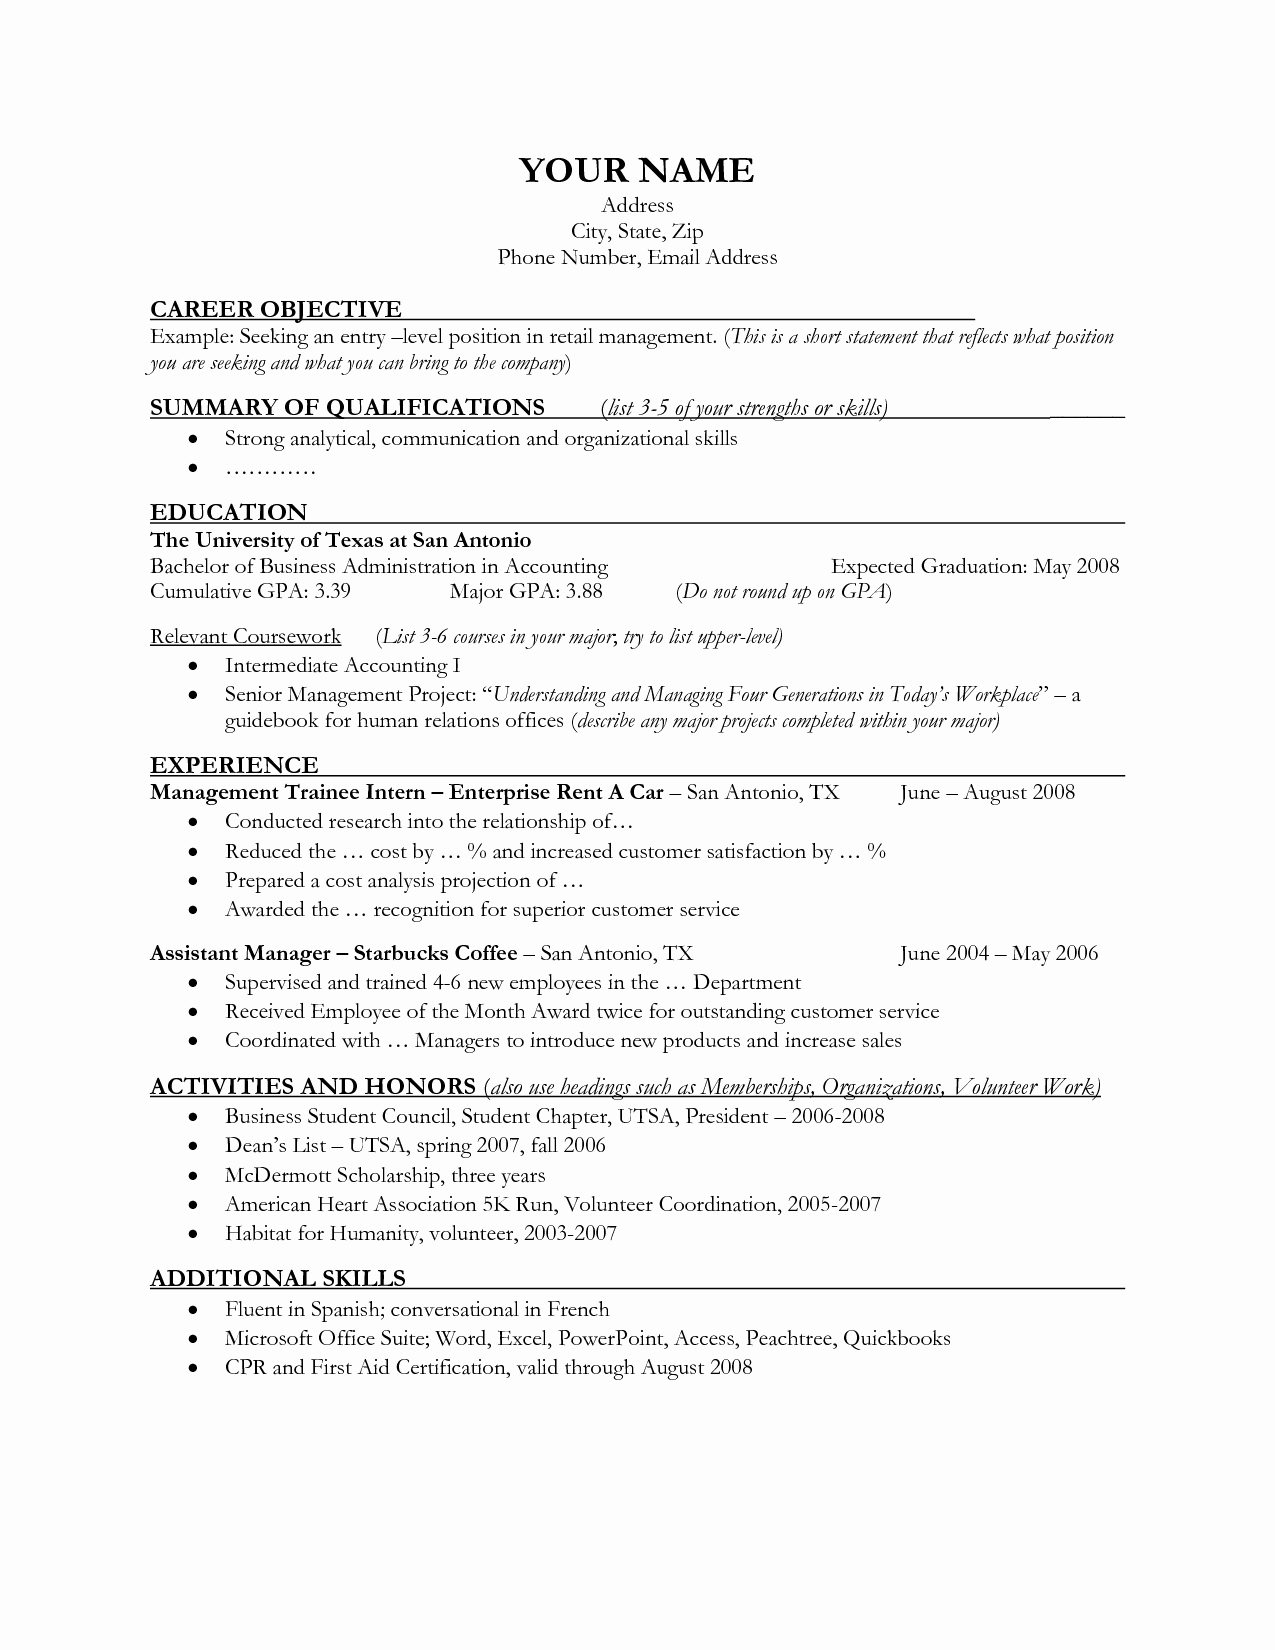 10 Resume Objective Examples and Writing Tips